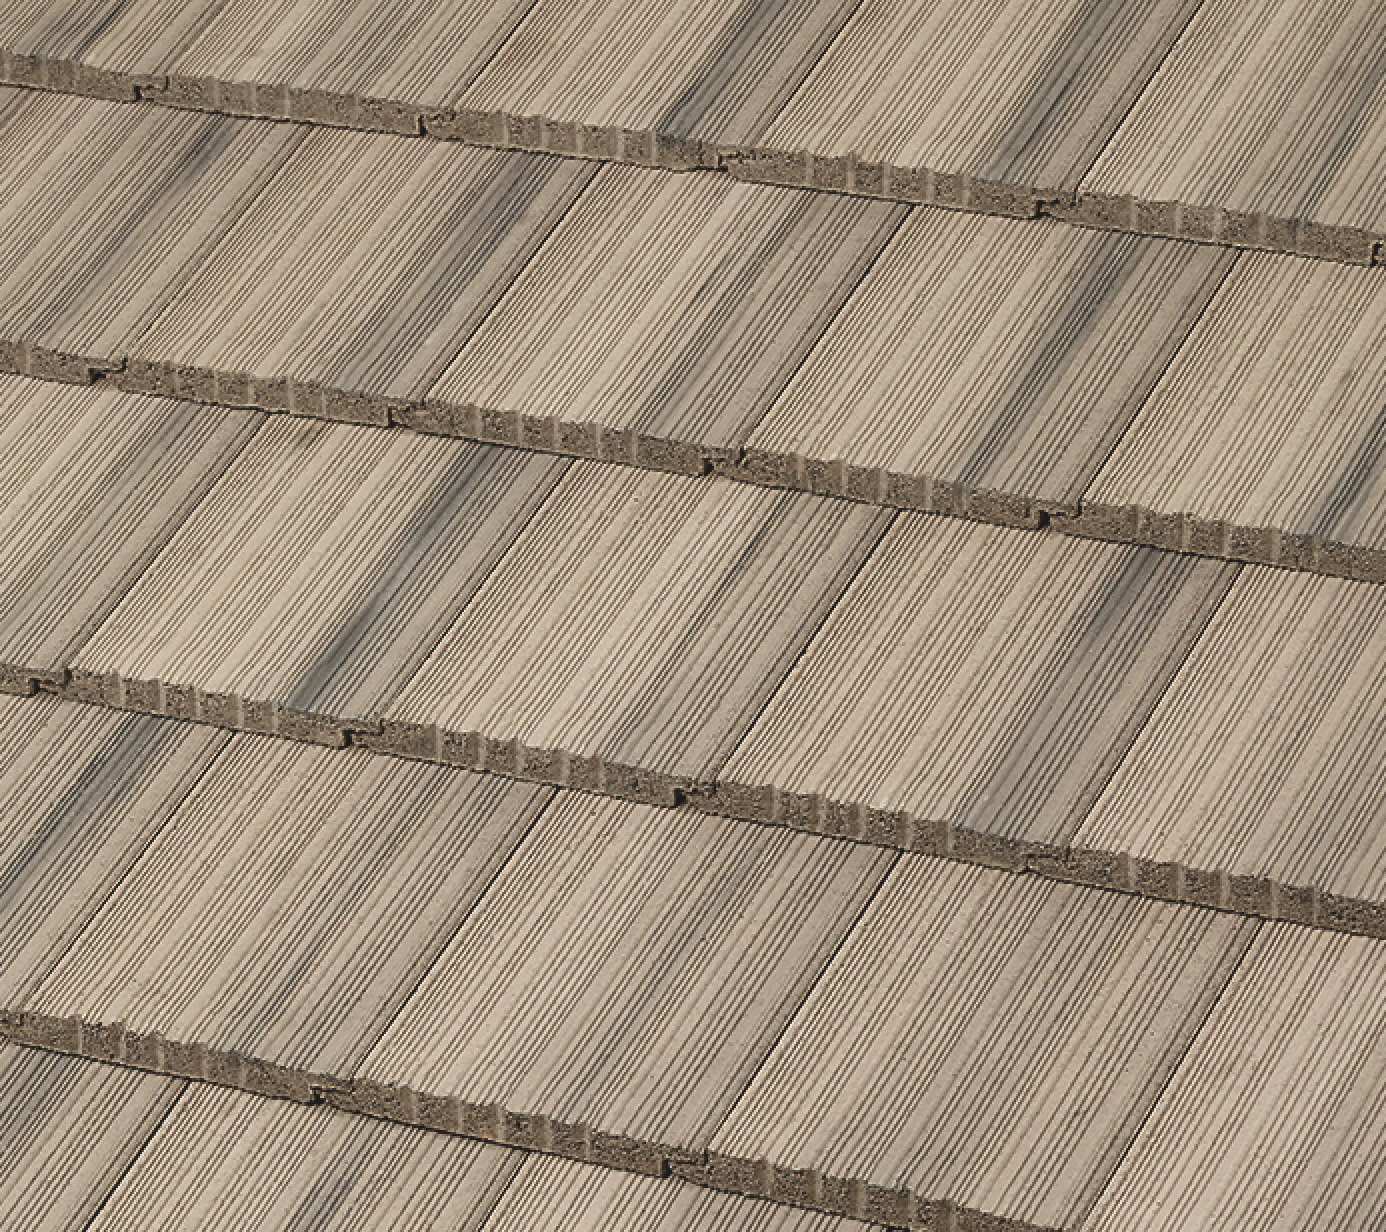 Concrete Tile Lines Available in New Suite of Colors - Roofing